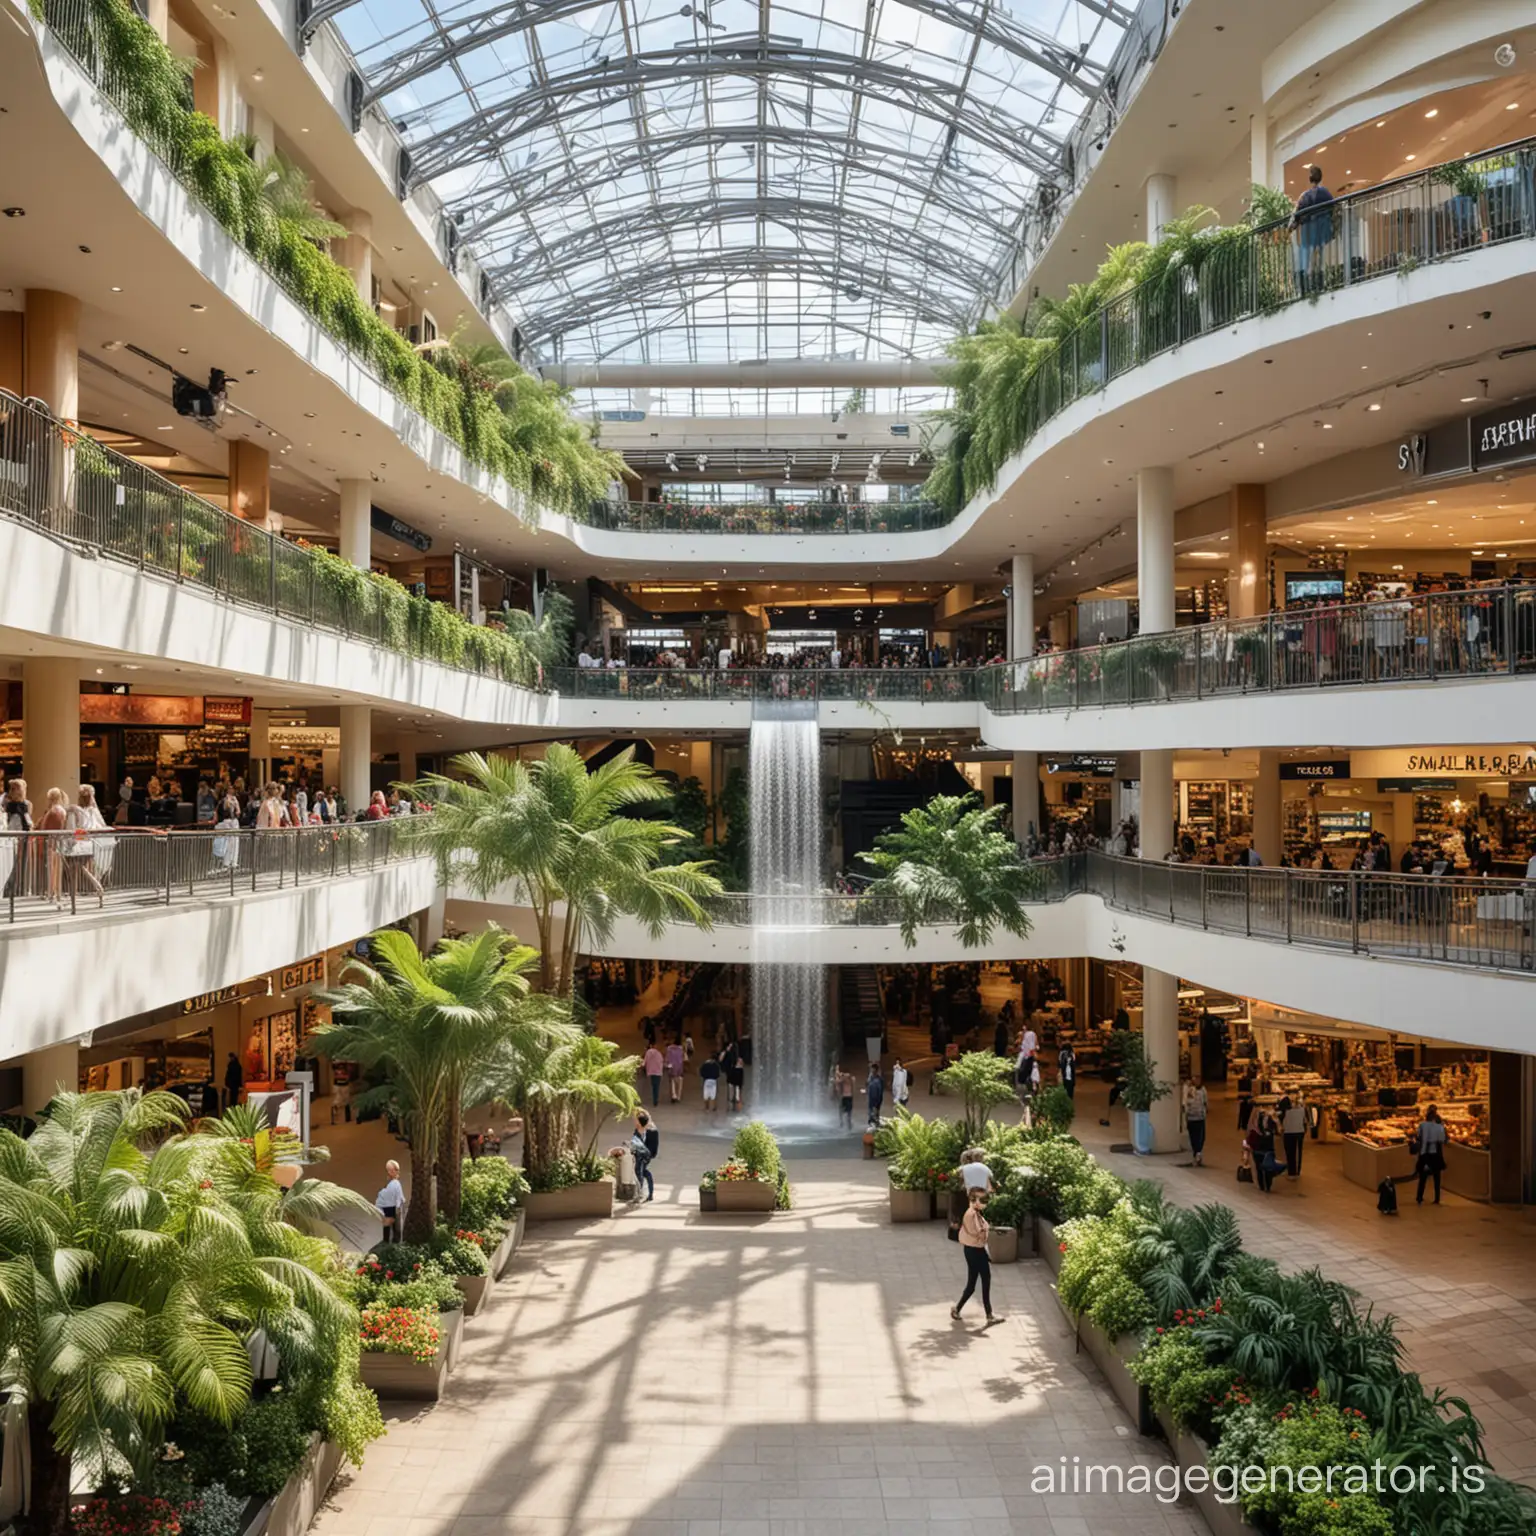 Stunning large panoramic view of a shopping center. Bright with two levels, many shops,. Small garden area, waterfall, sun shines in through front window, bustling with people shopping